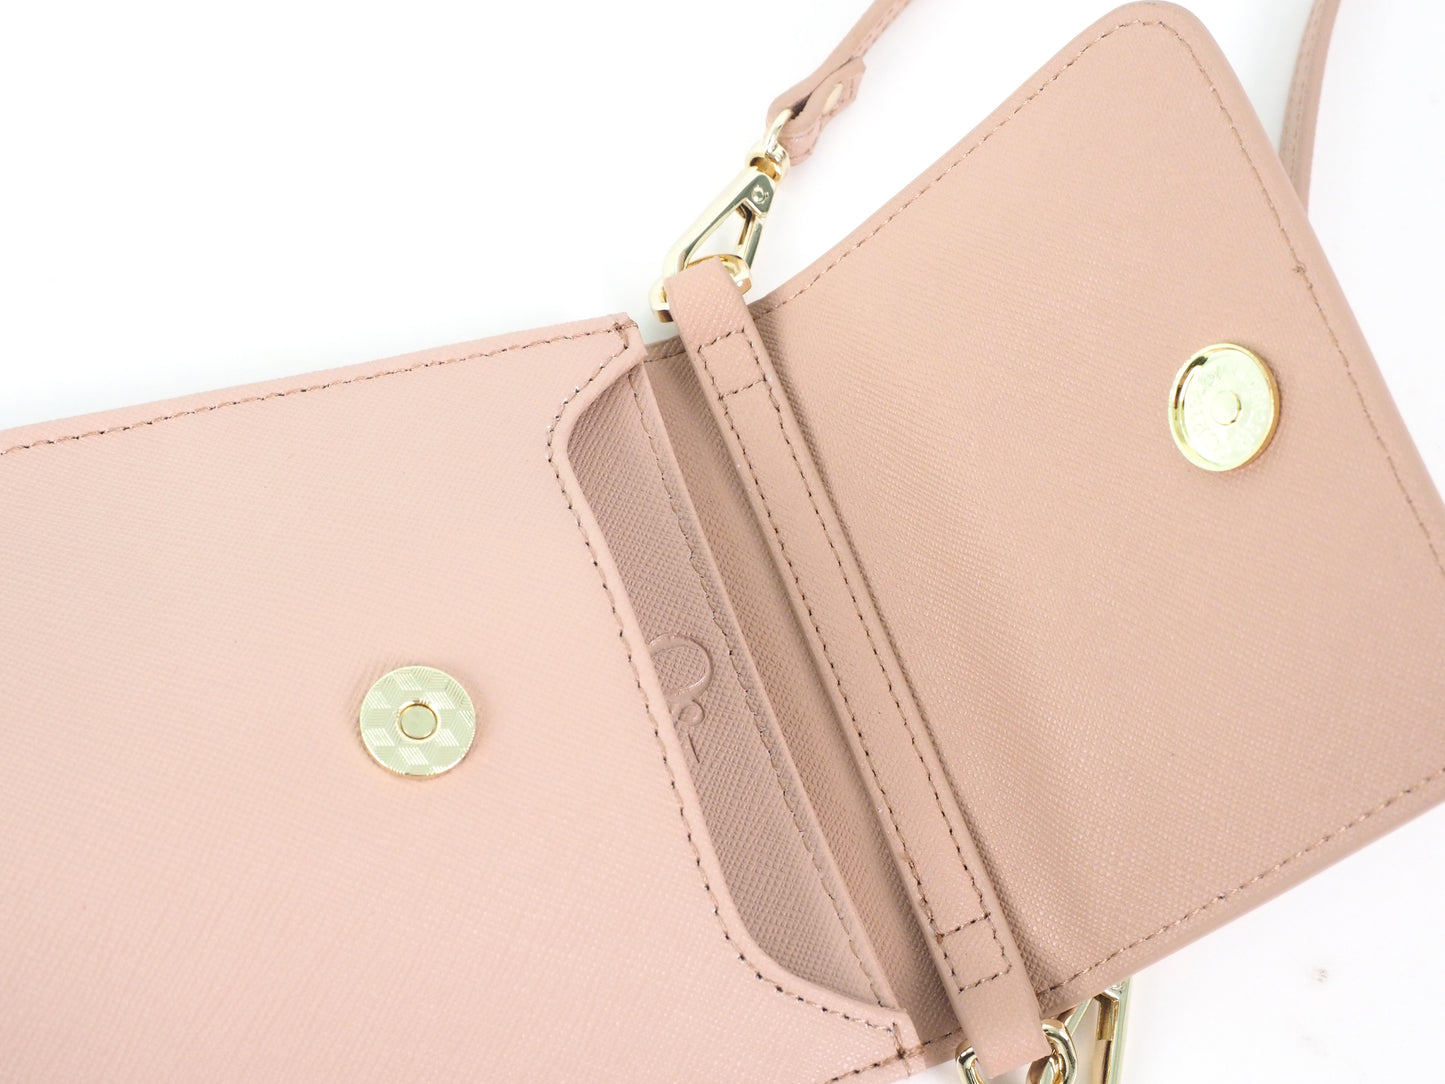 The Crossbody Phone Pouch